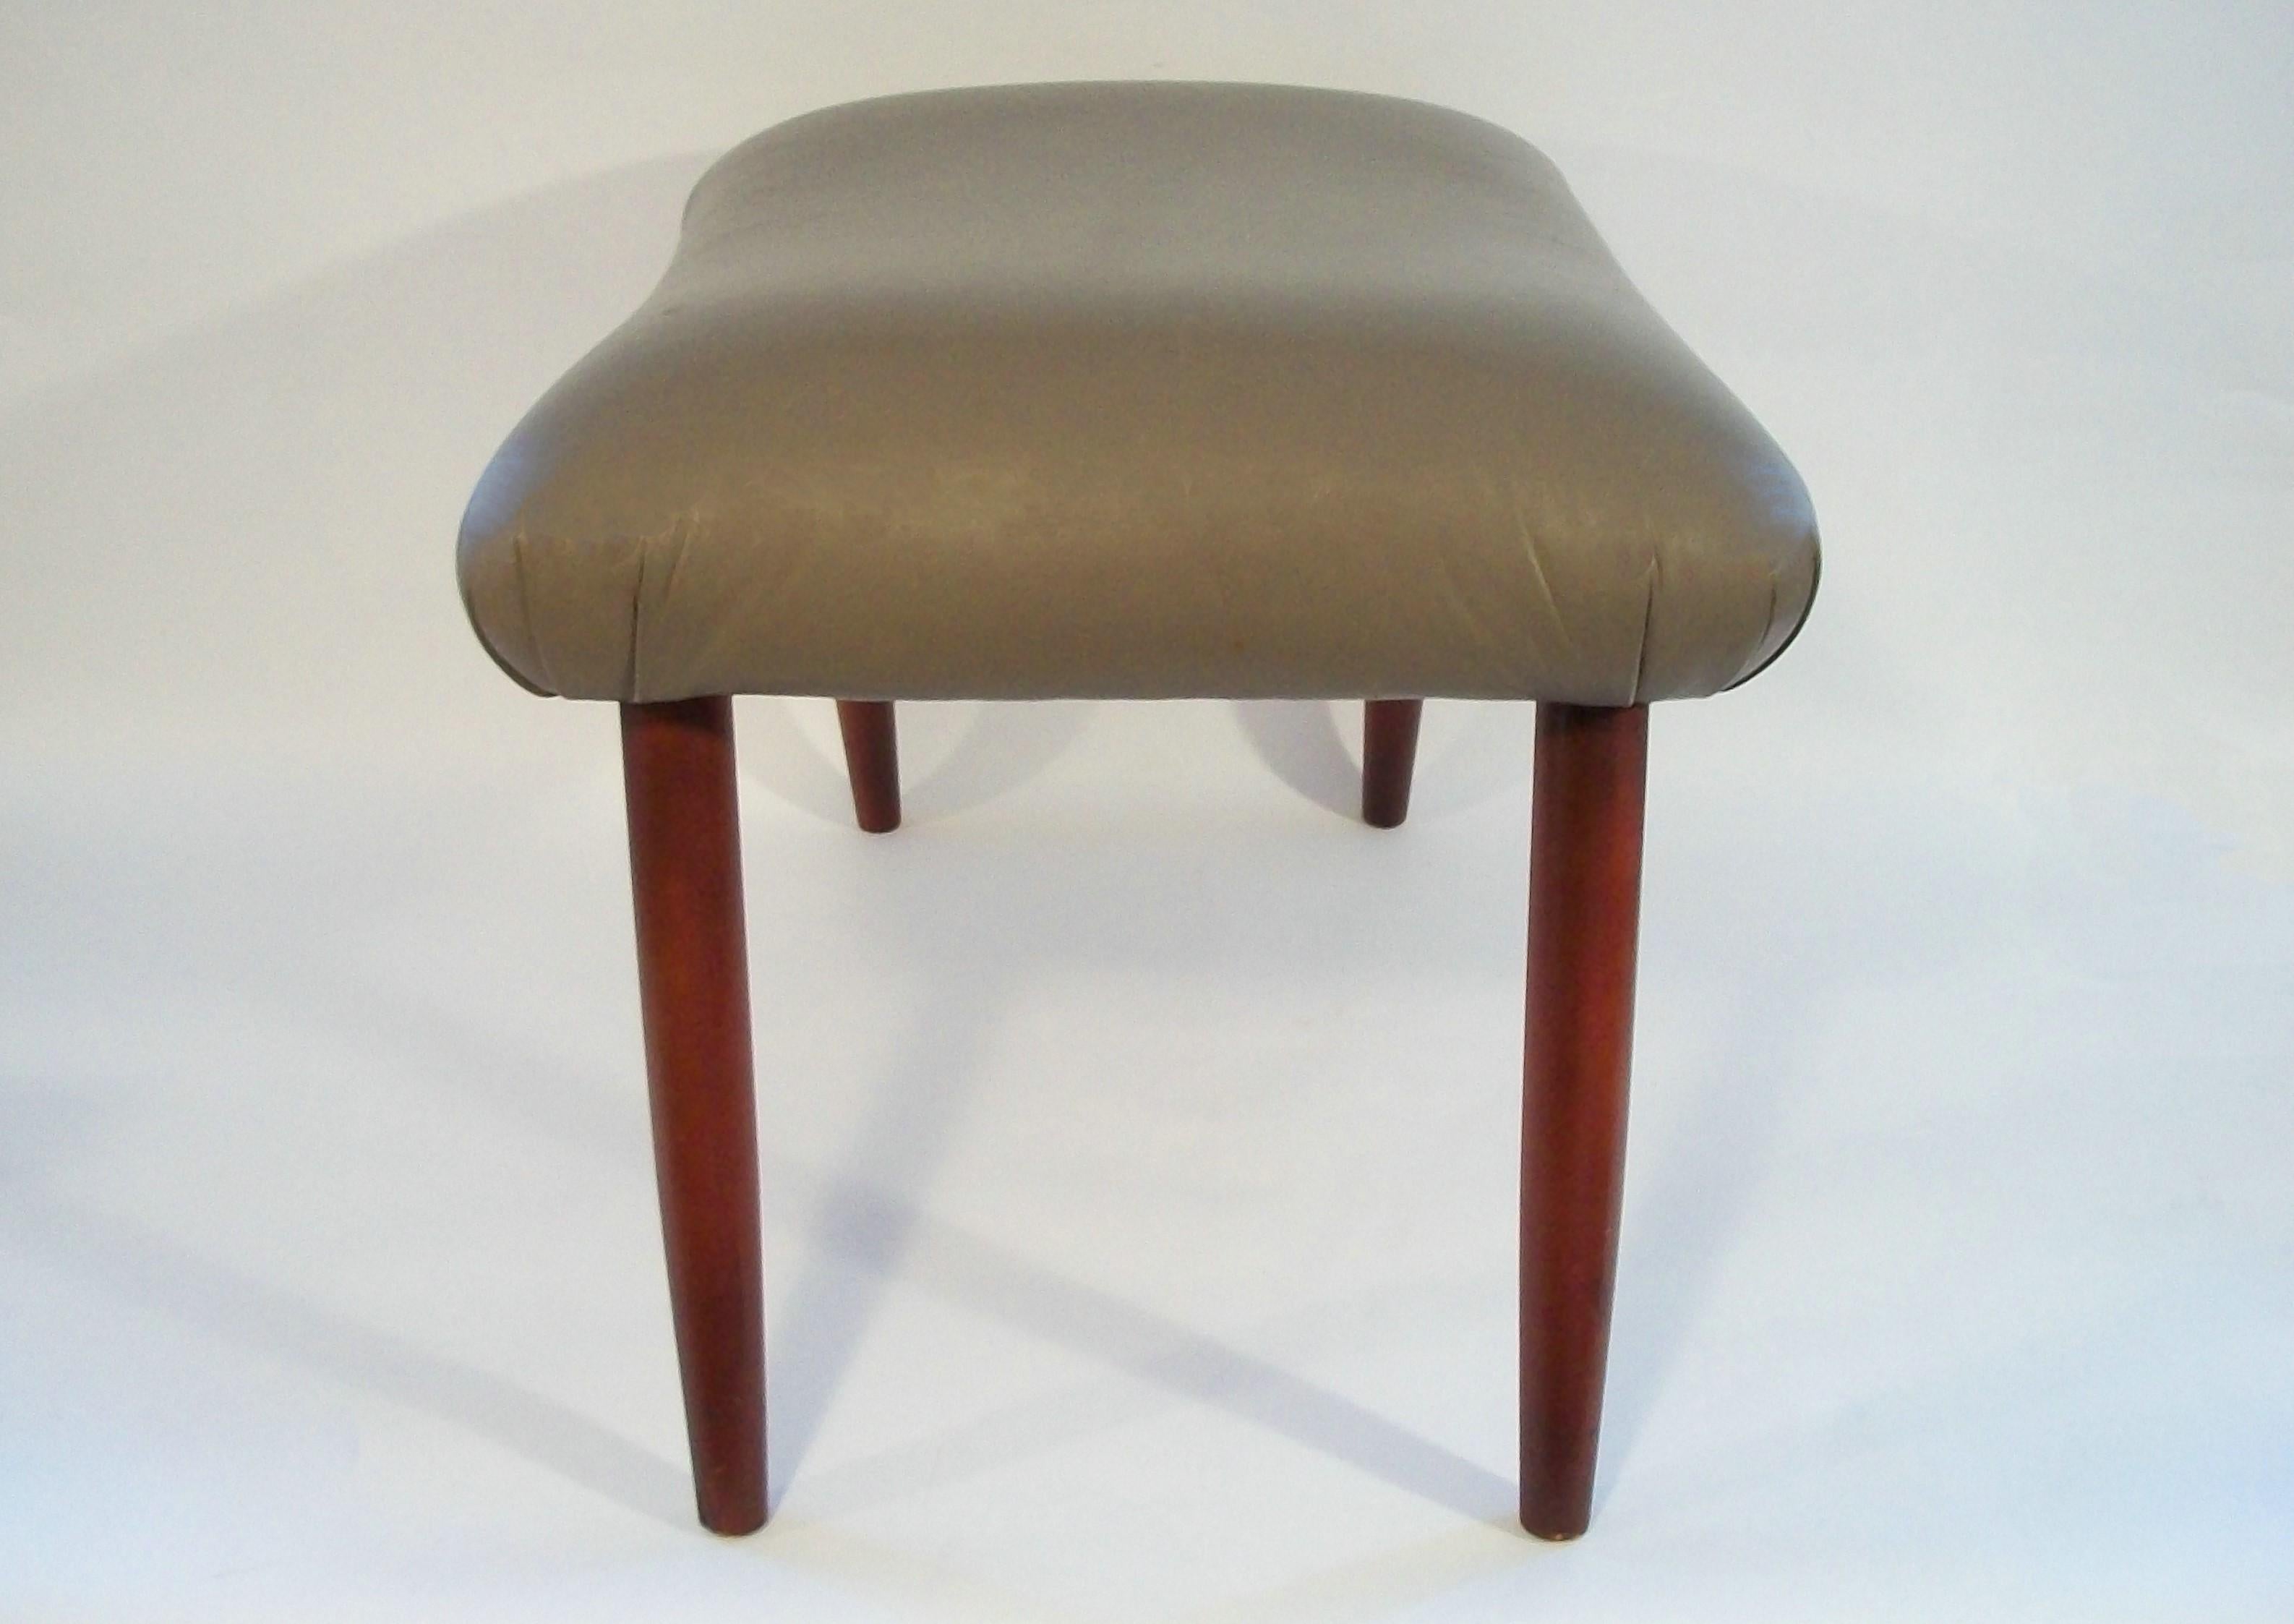 20th Century Mid Century Saddle Seat Foot Stool / Ottoman - Leather Upholstery - Circa 1980's For Sale